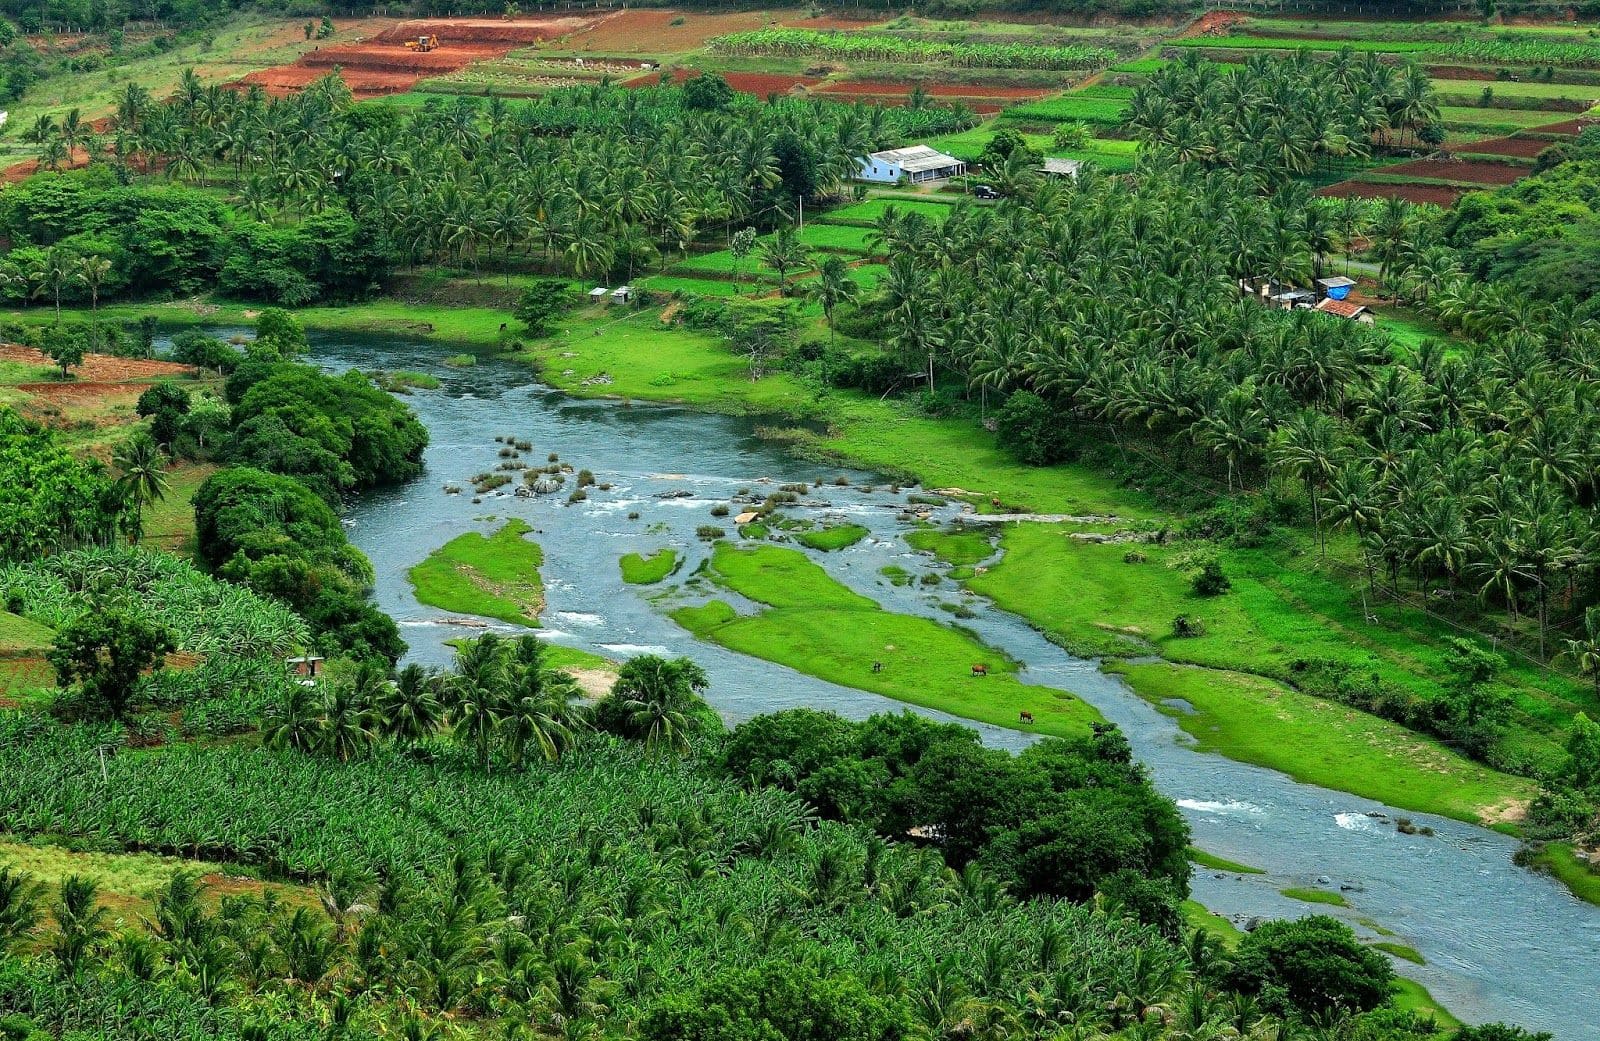 attapadi is one of the best tourist places in India